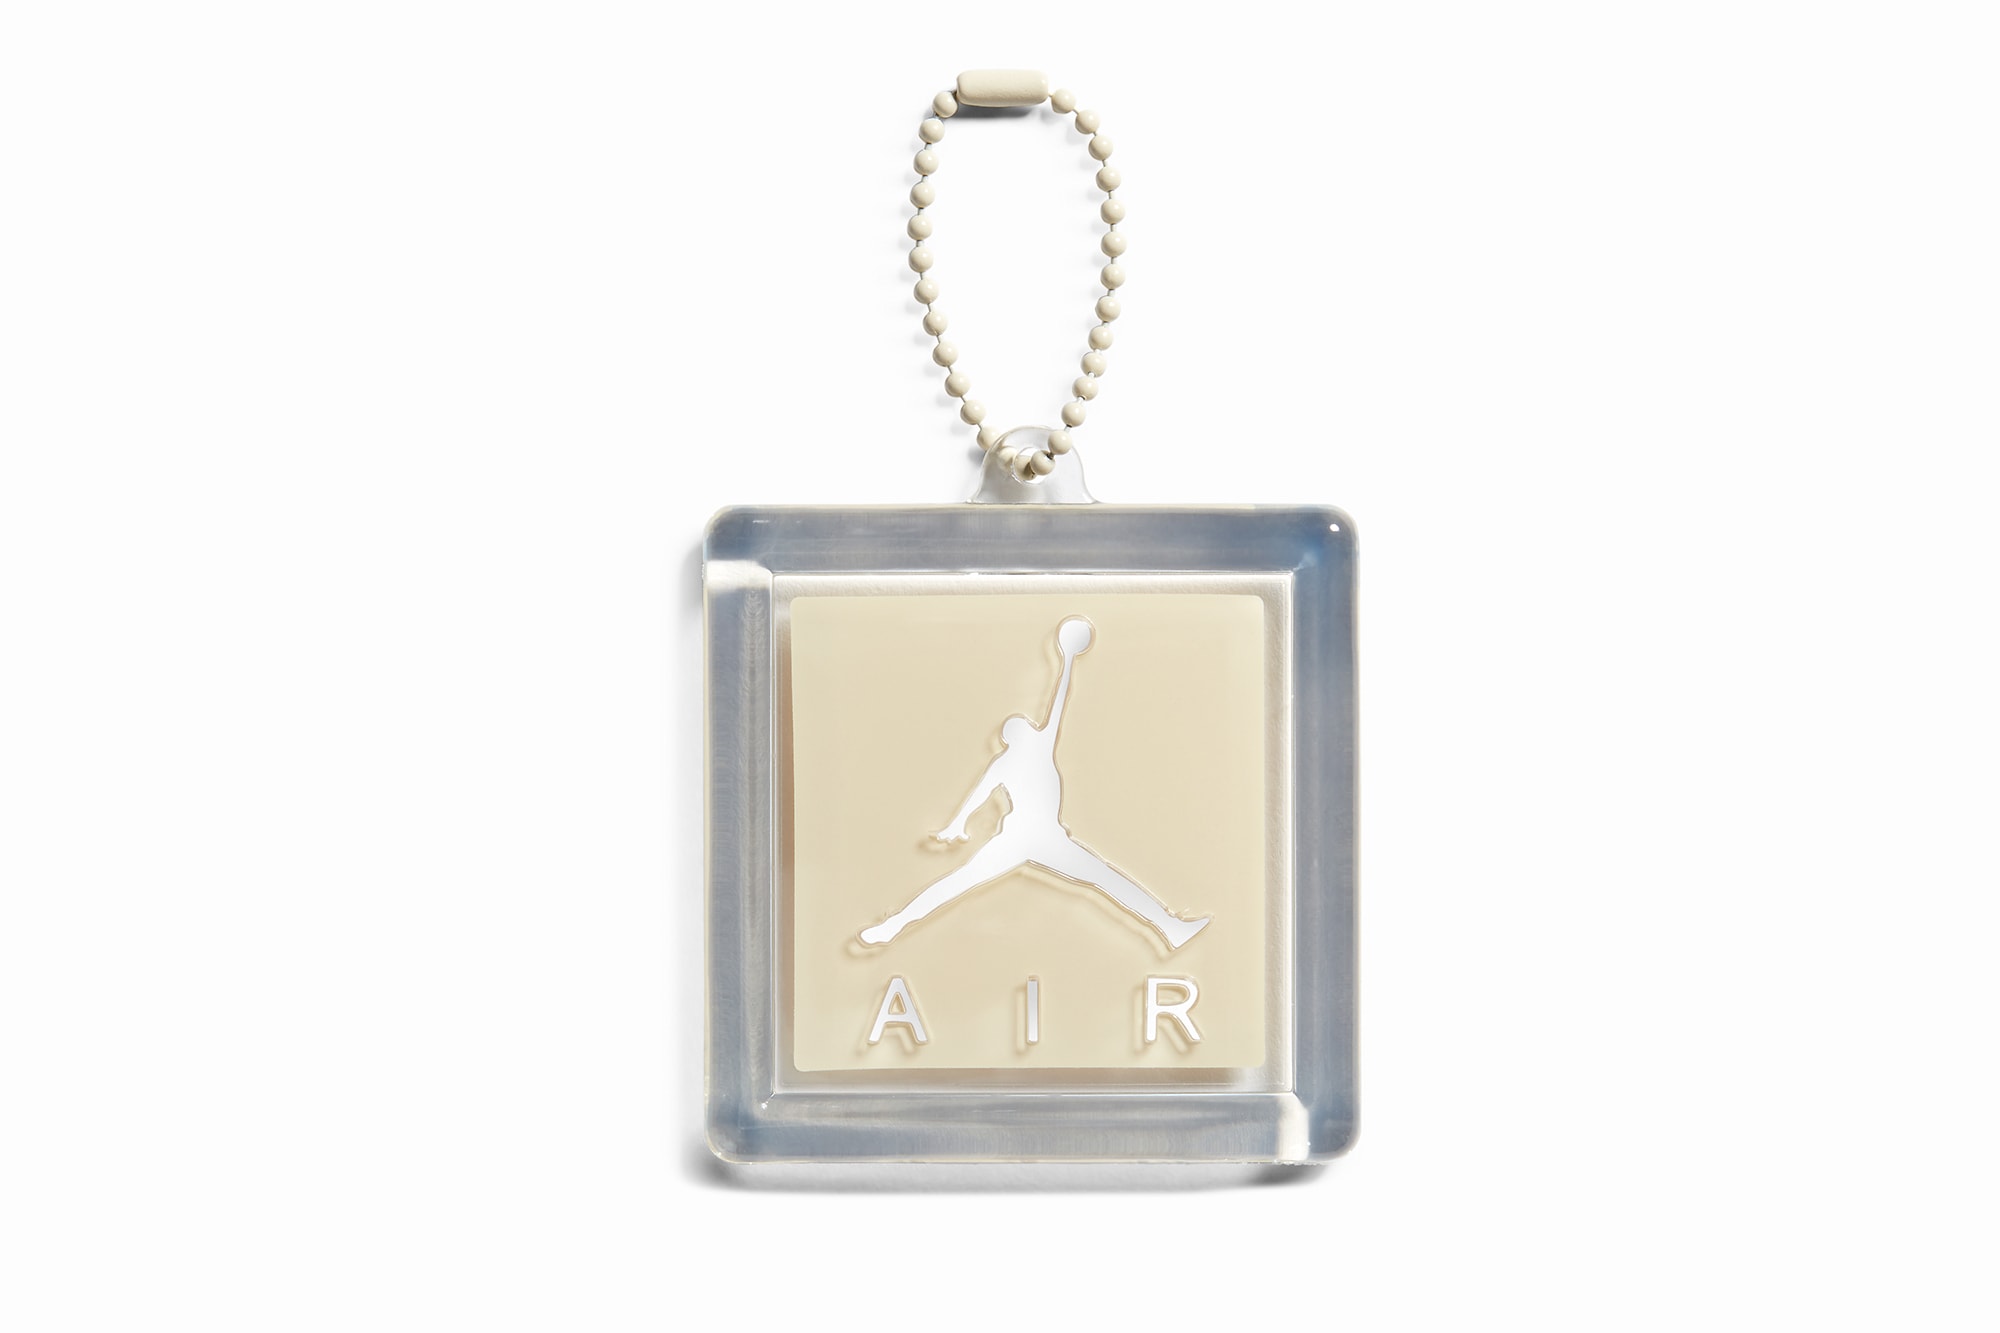 Off White Air Jordan 4 Sail Official Images Release Date Jumpman Virgil Abloh Collab Collaboration Nike HYPEBEAST Kicks Preview Upcoming Sneakers Best Releases 2020 Limited